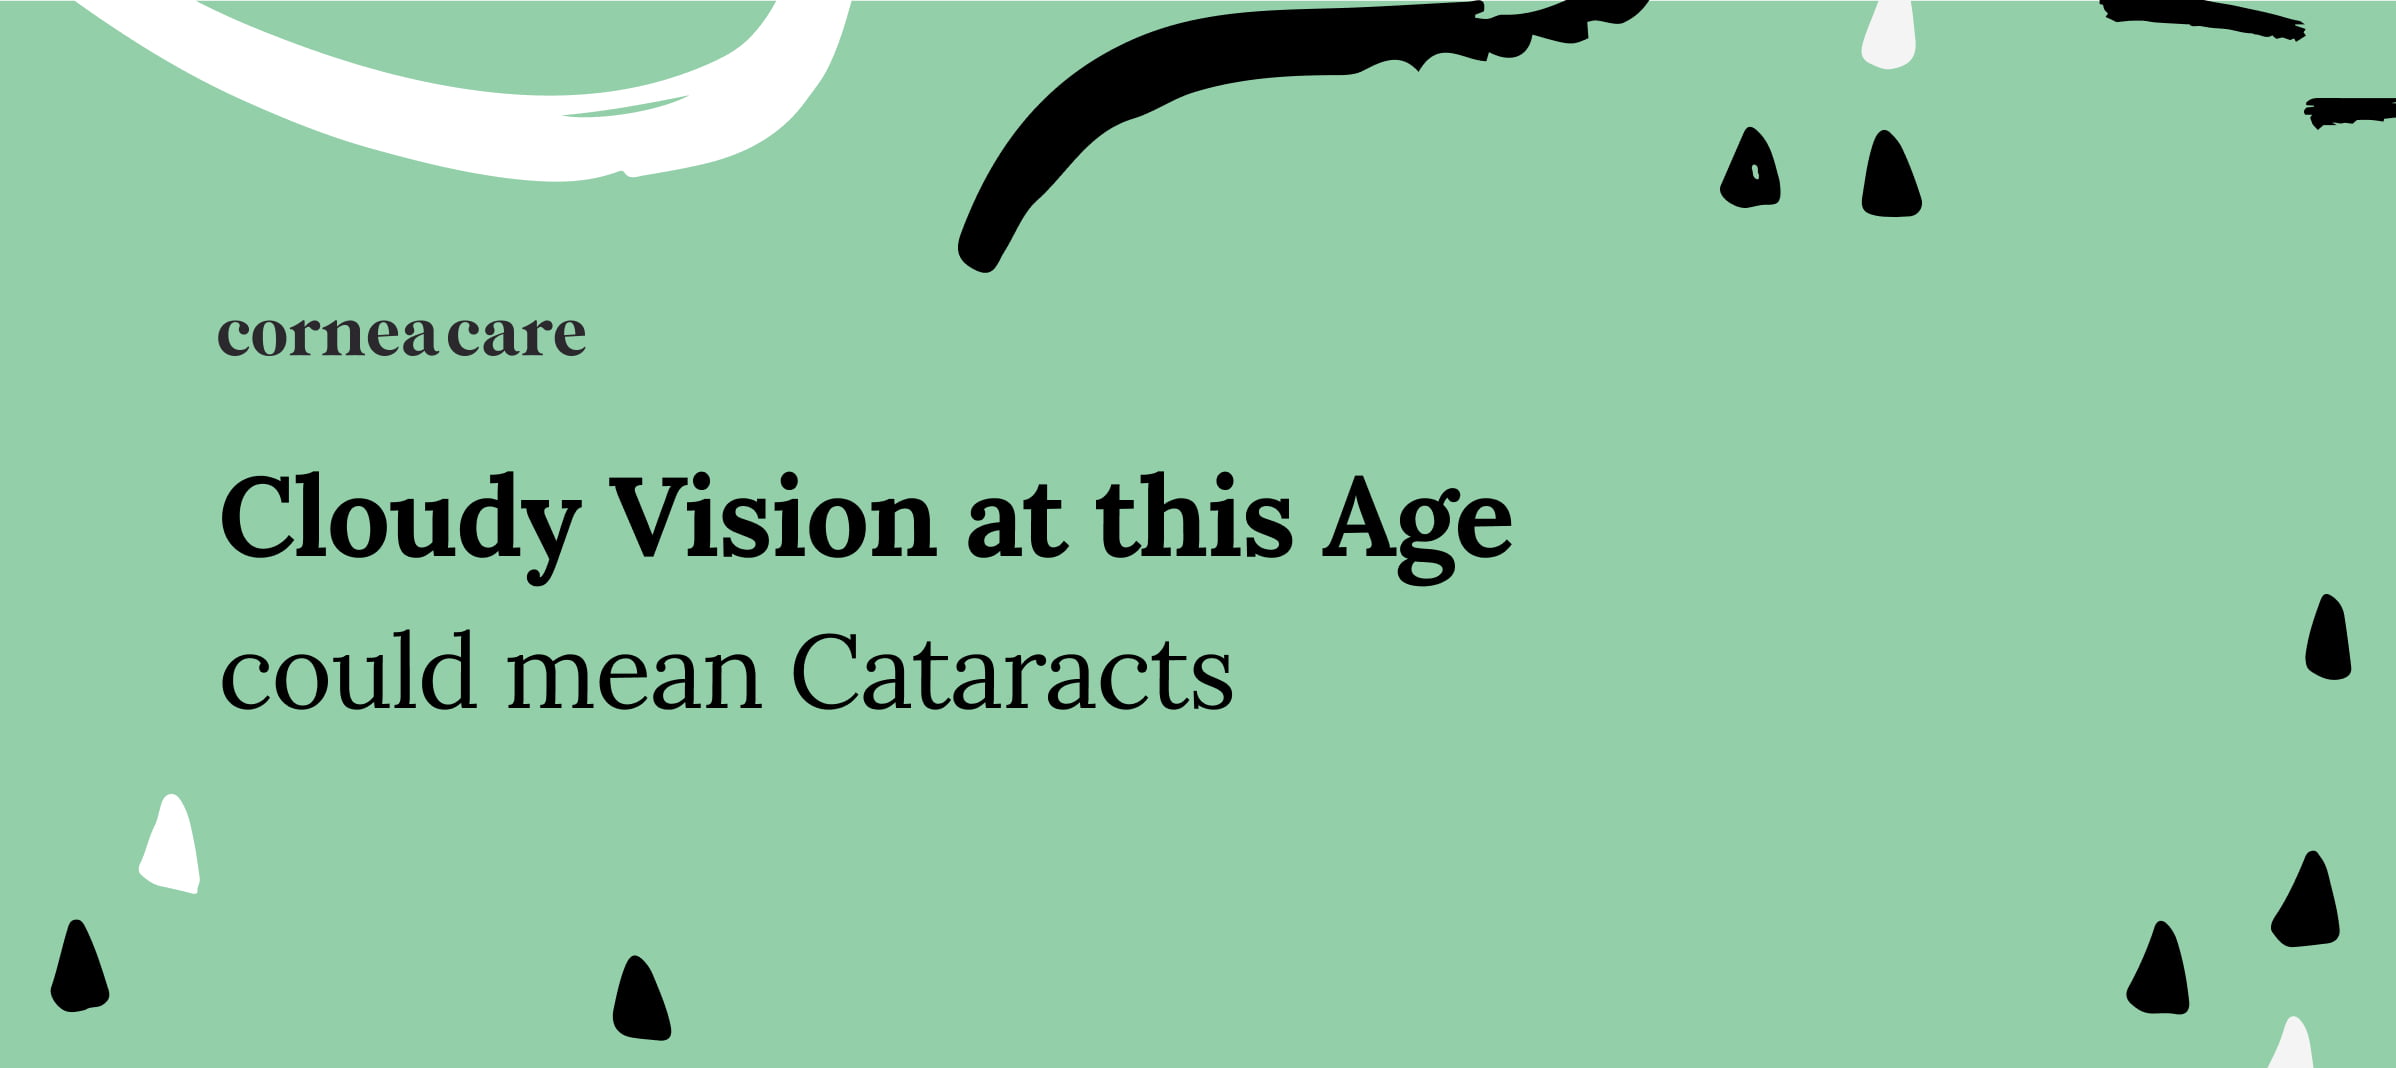 Average age for cataracts